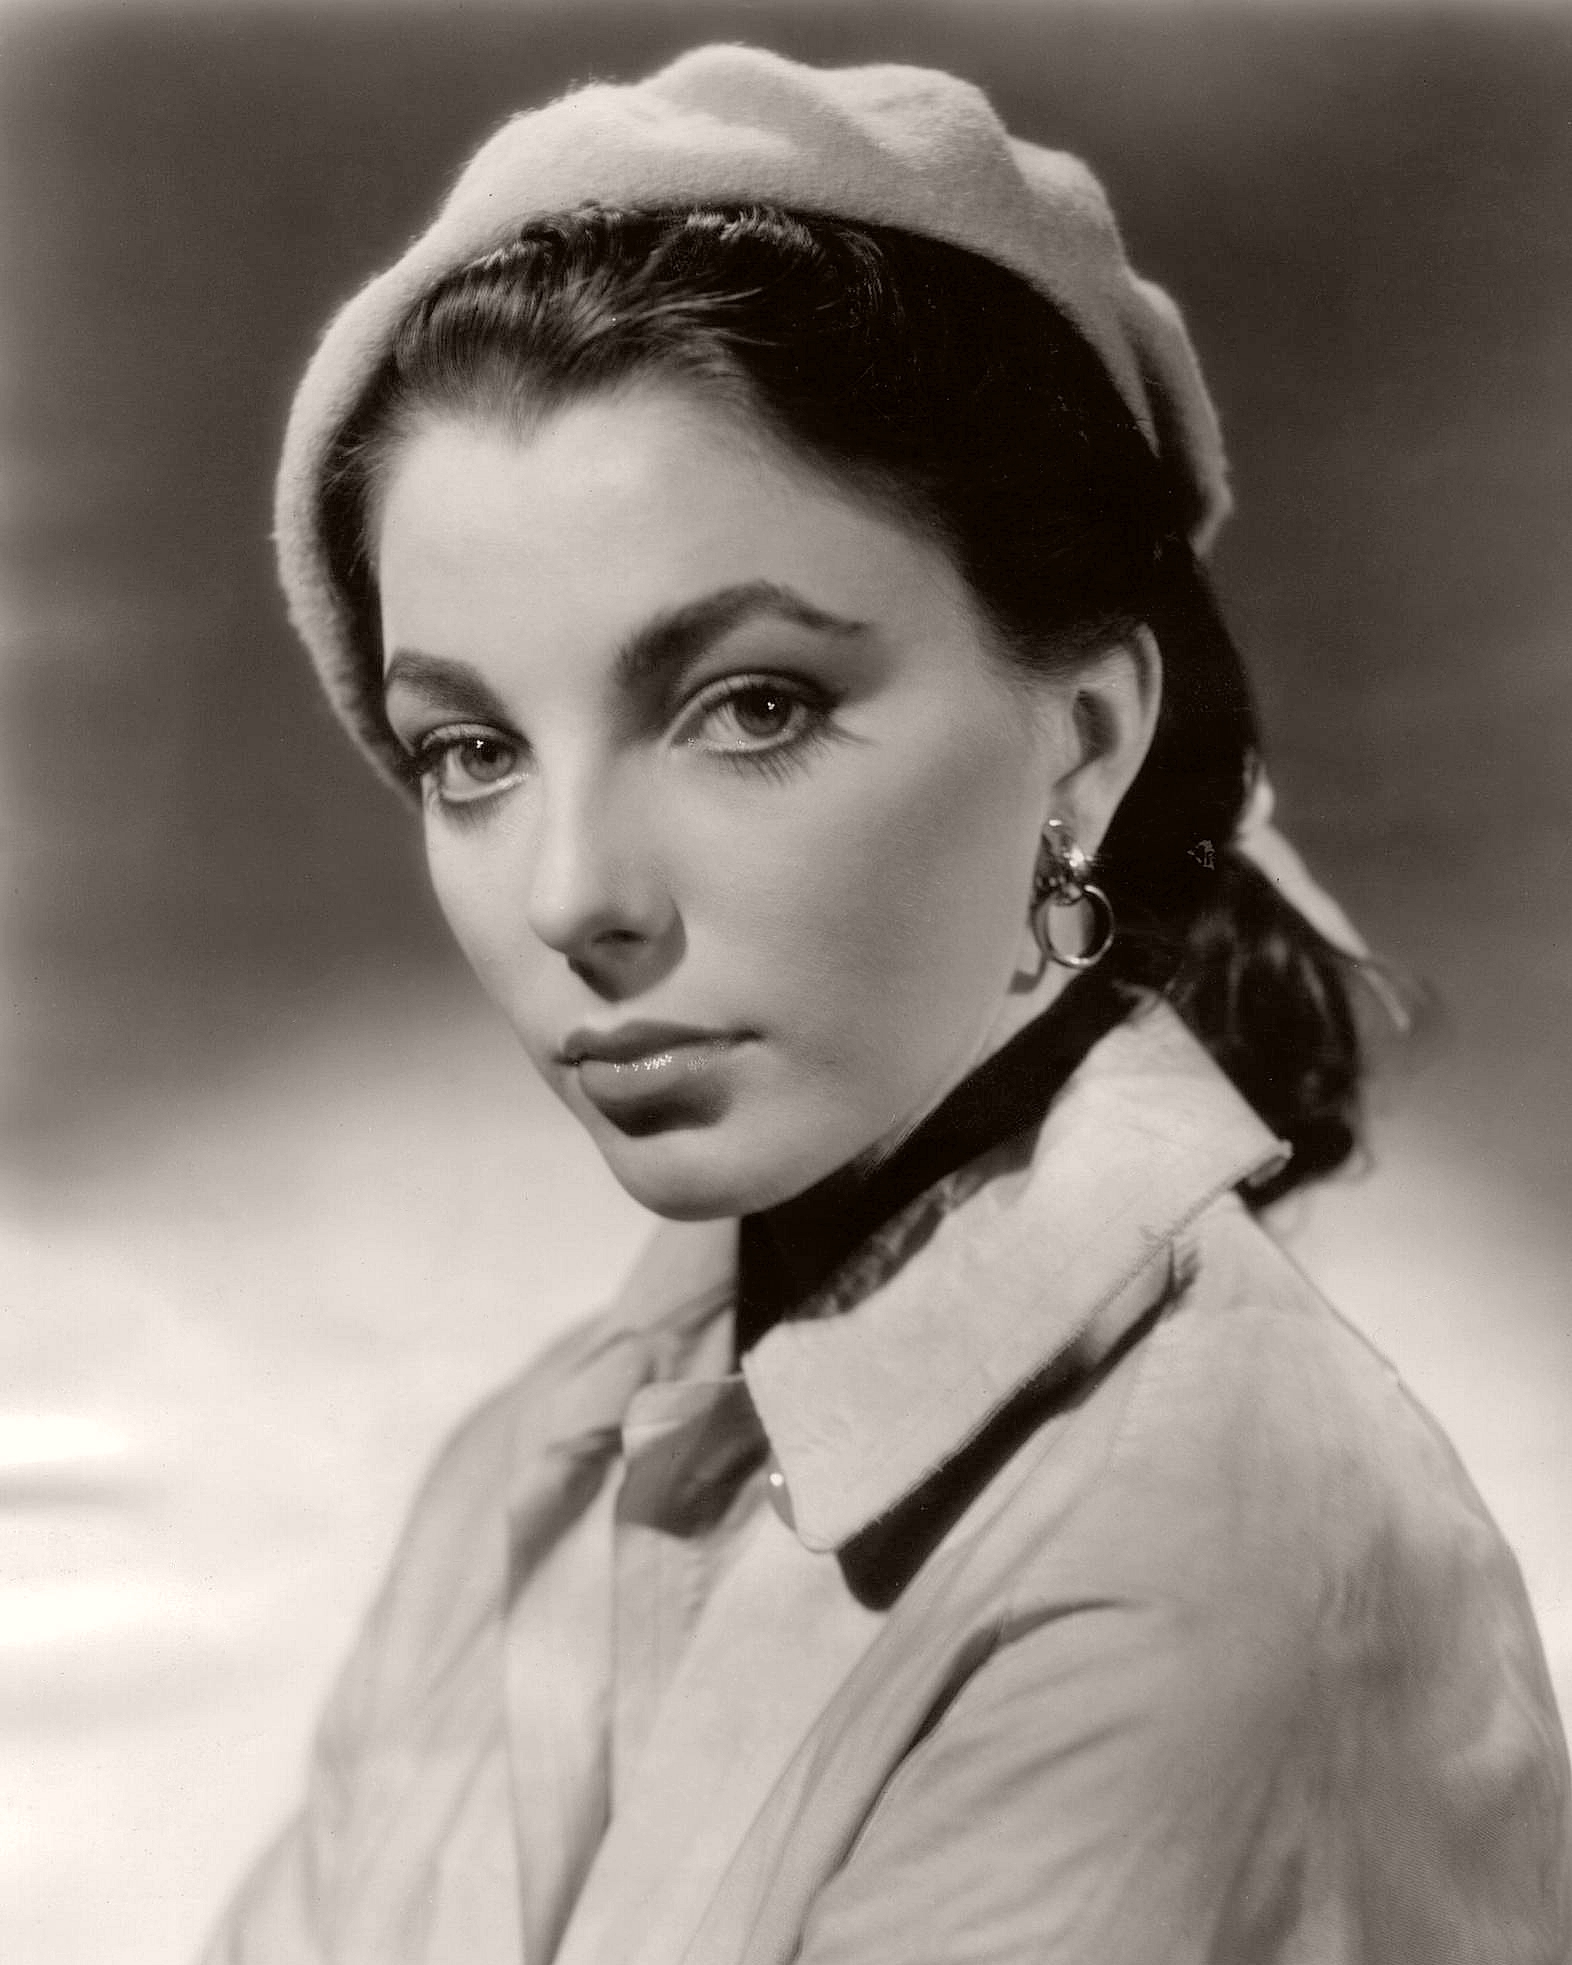 Photograph of Joan Collins from the 1950s. The English actress is sporting a beret